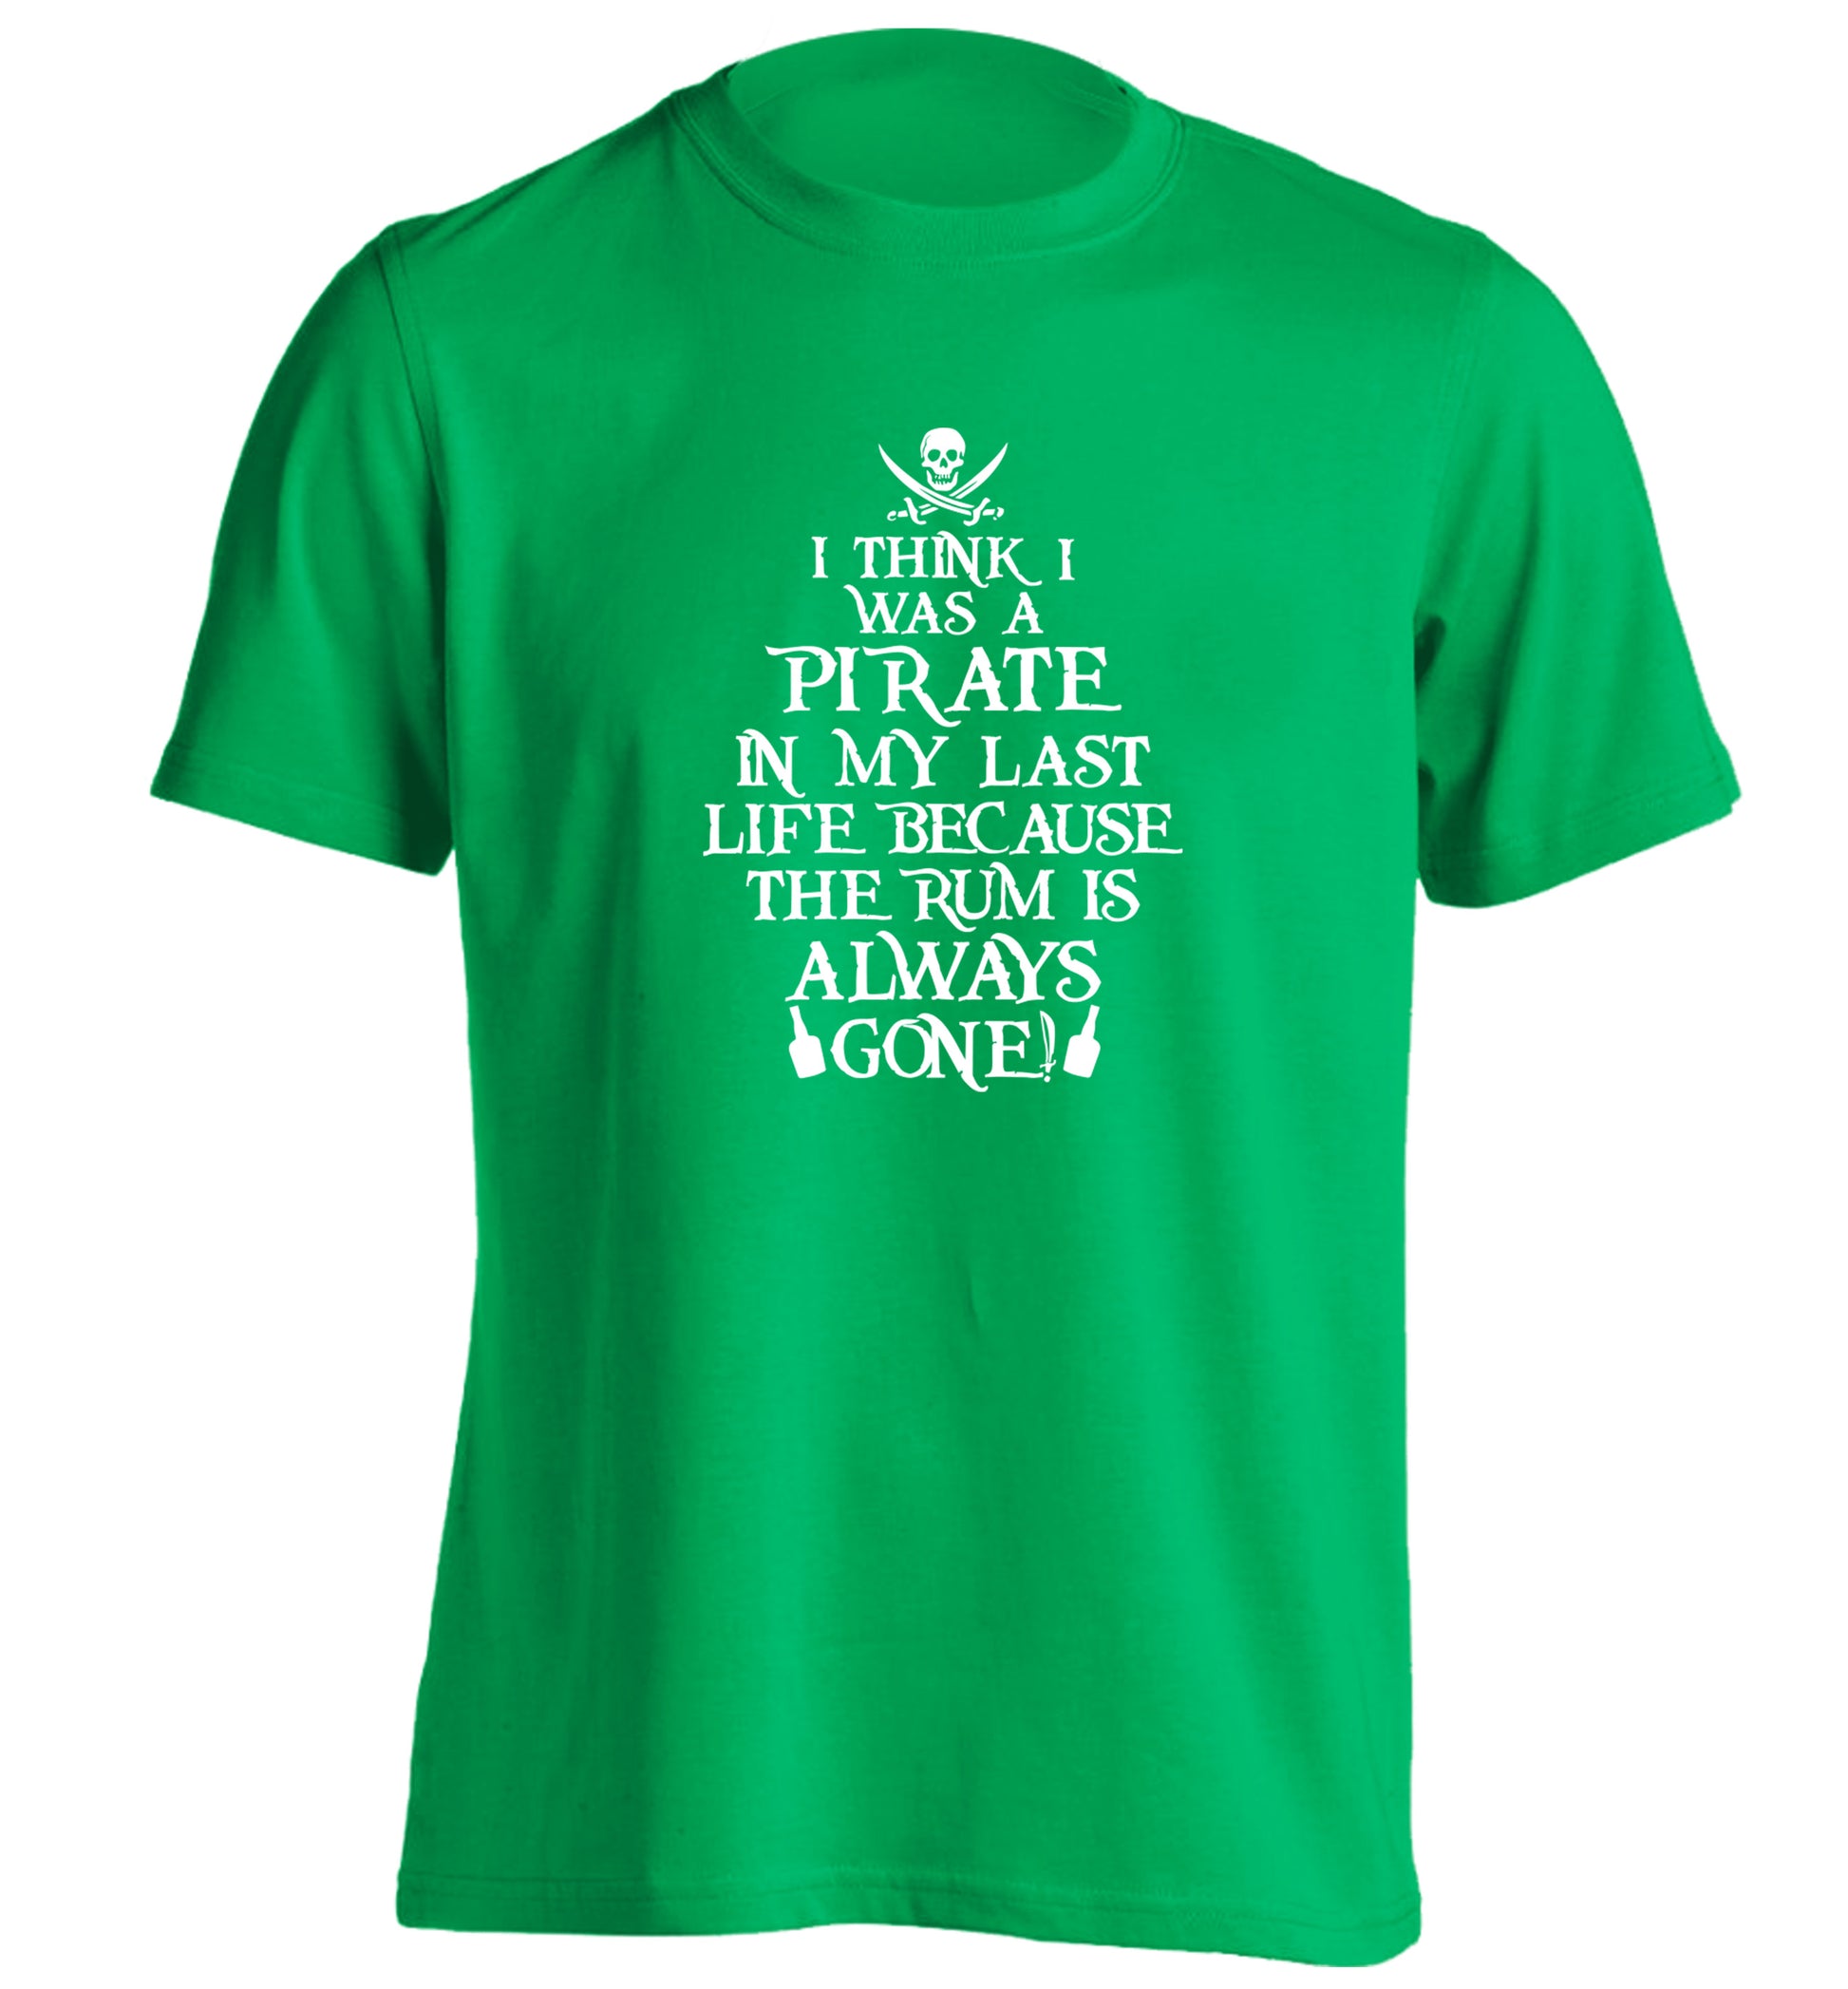 I think I was a pirate in my past life because the rum is always gone! adults unisex green Tshirt 2XL